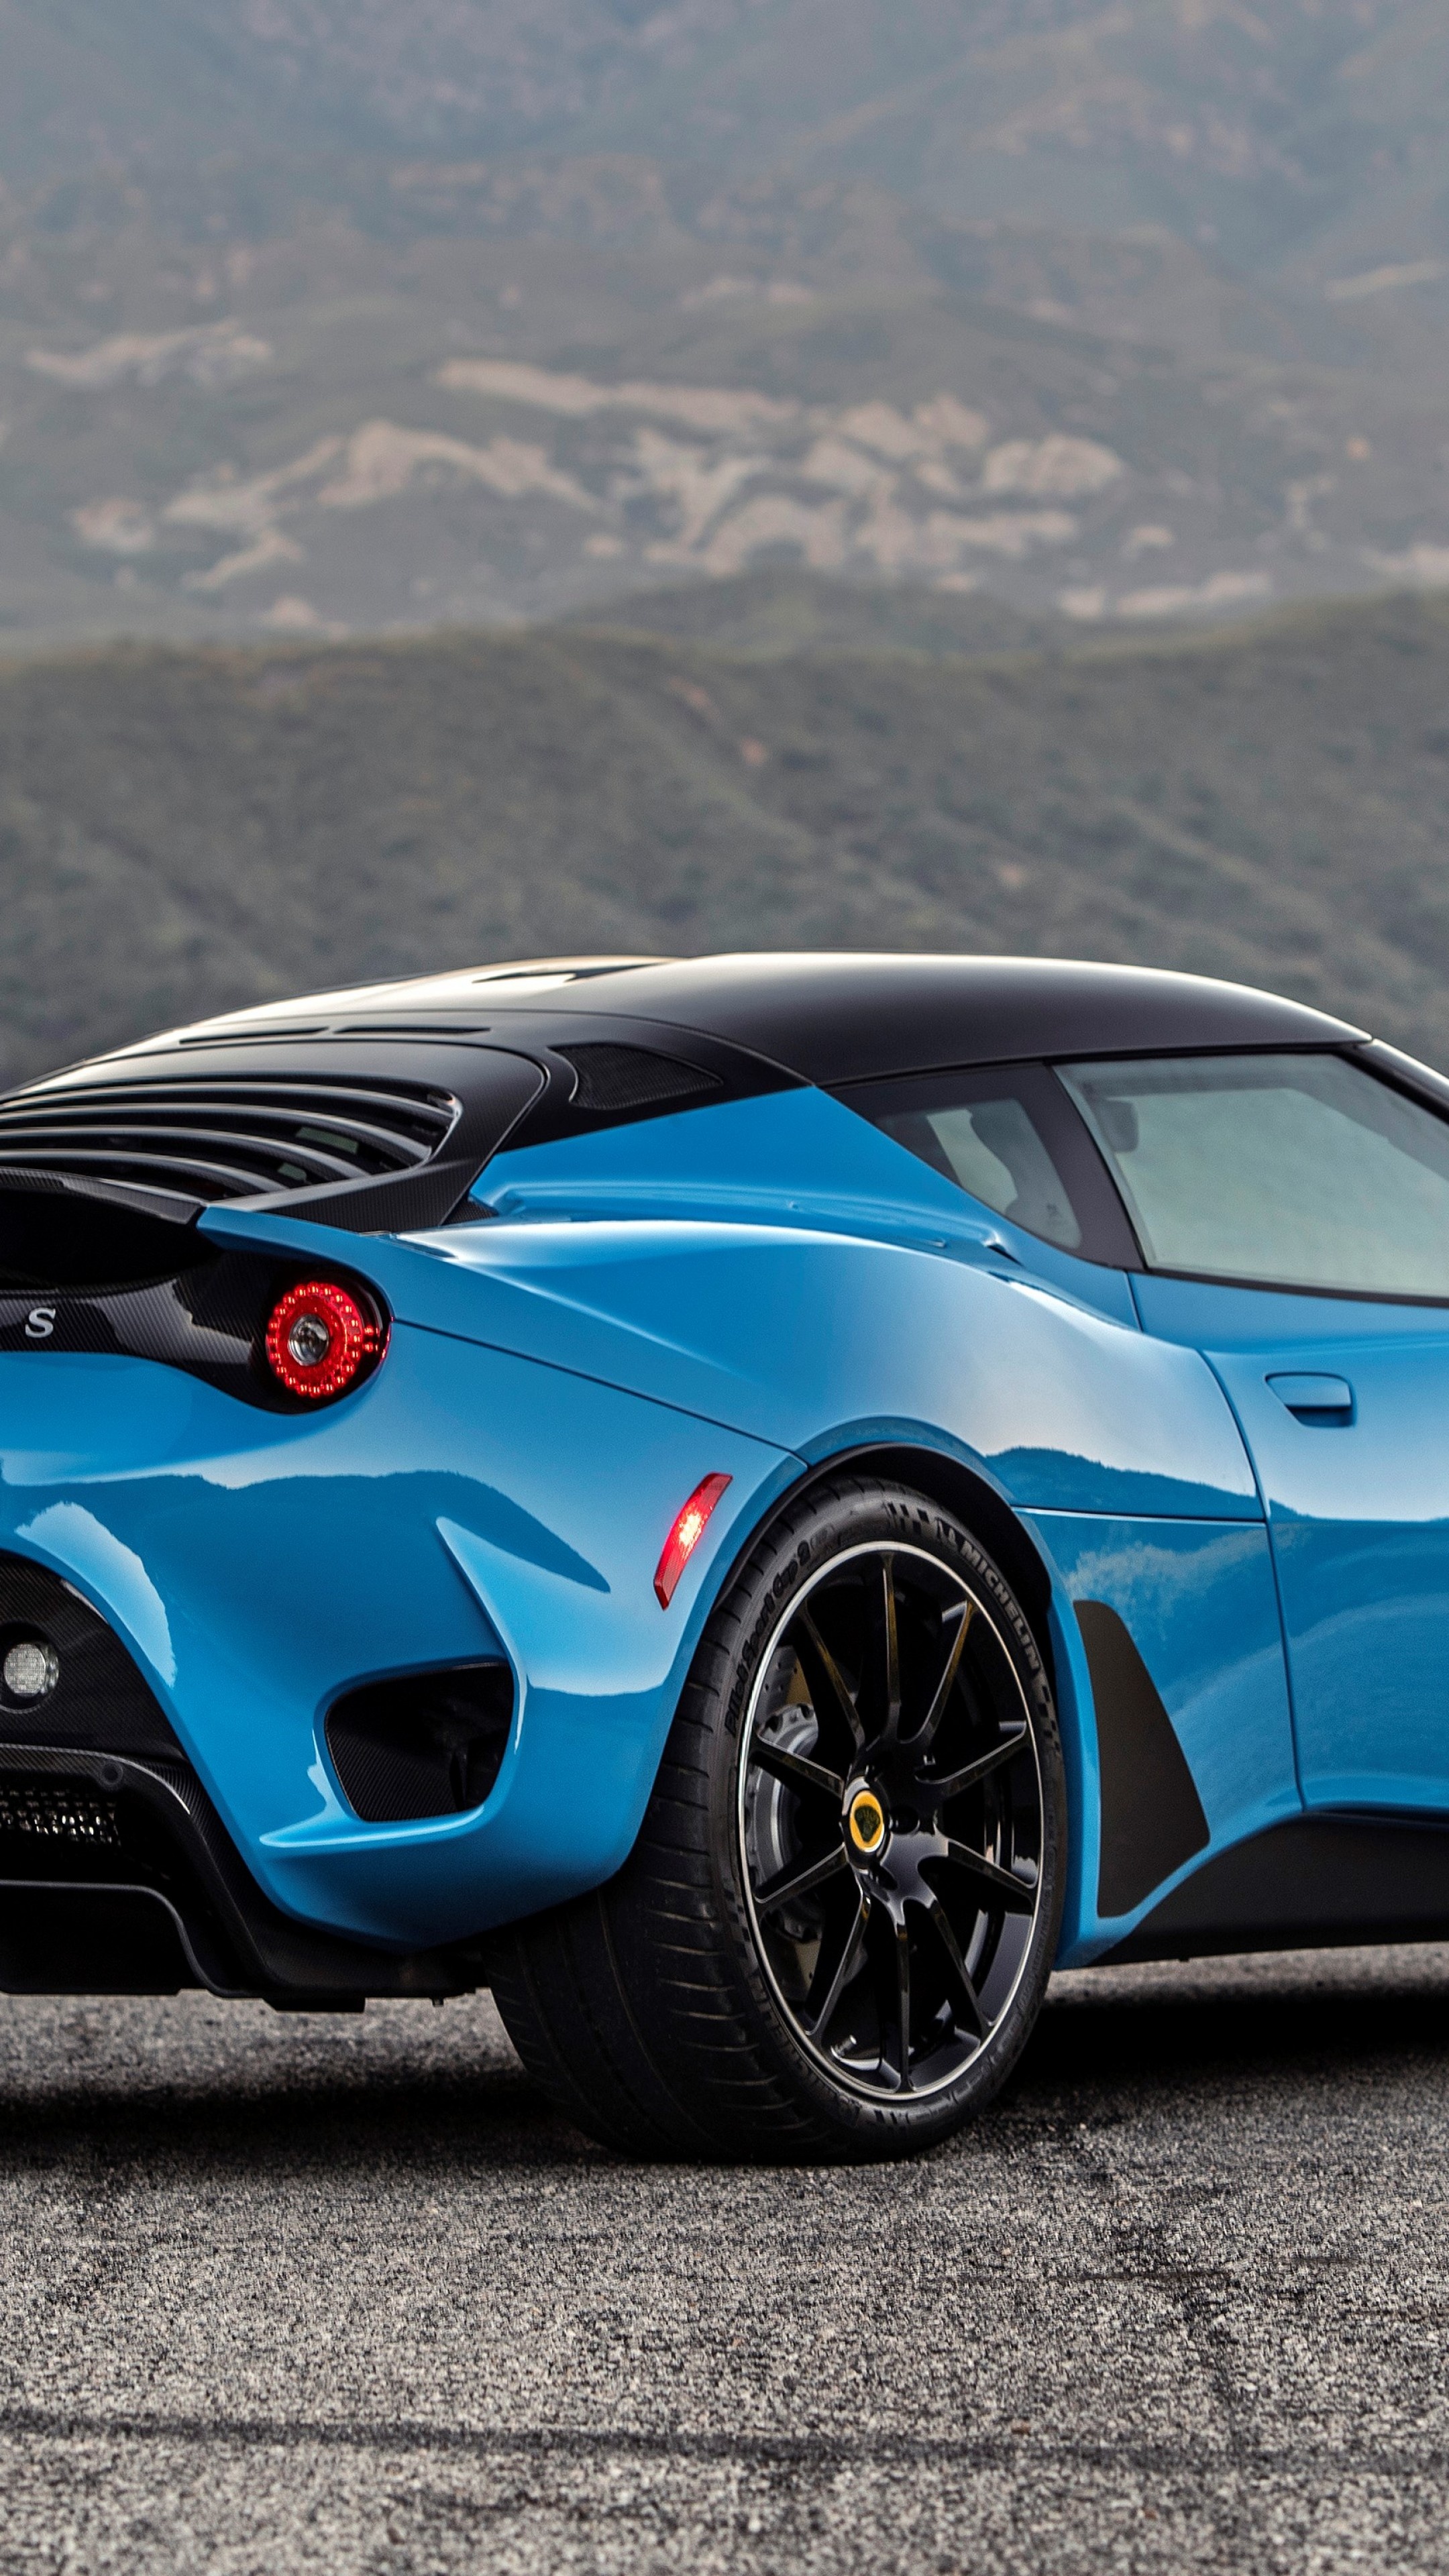 Lotus Evora GT, Captivating wallpaper, Speed and elegance, Automotive perfection, 2160x3840 4K Phone